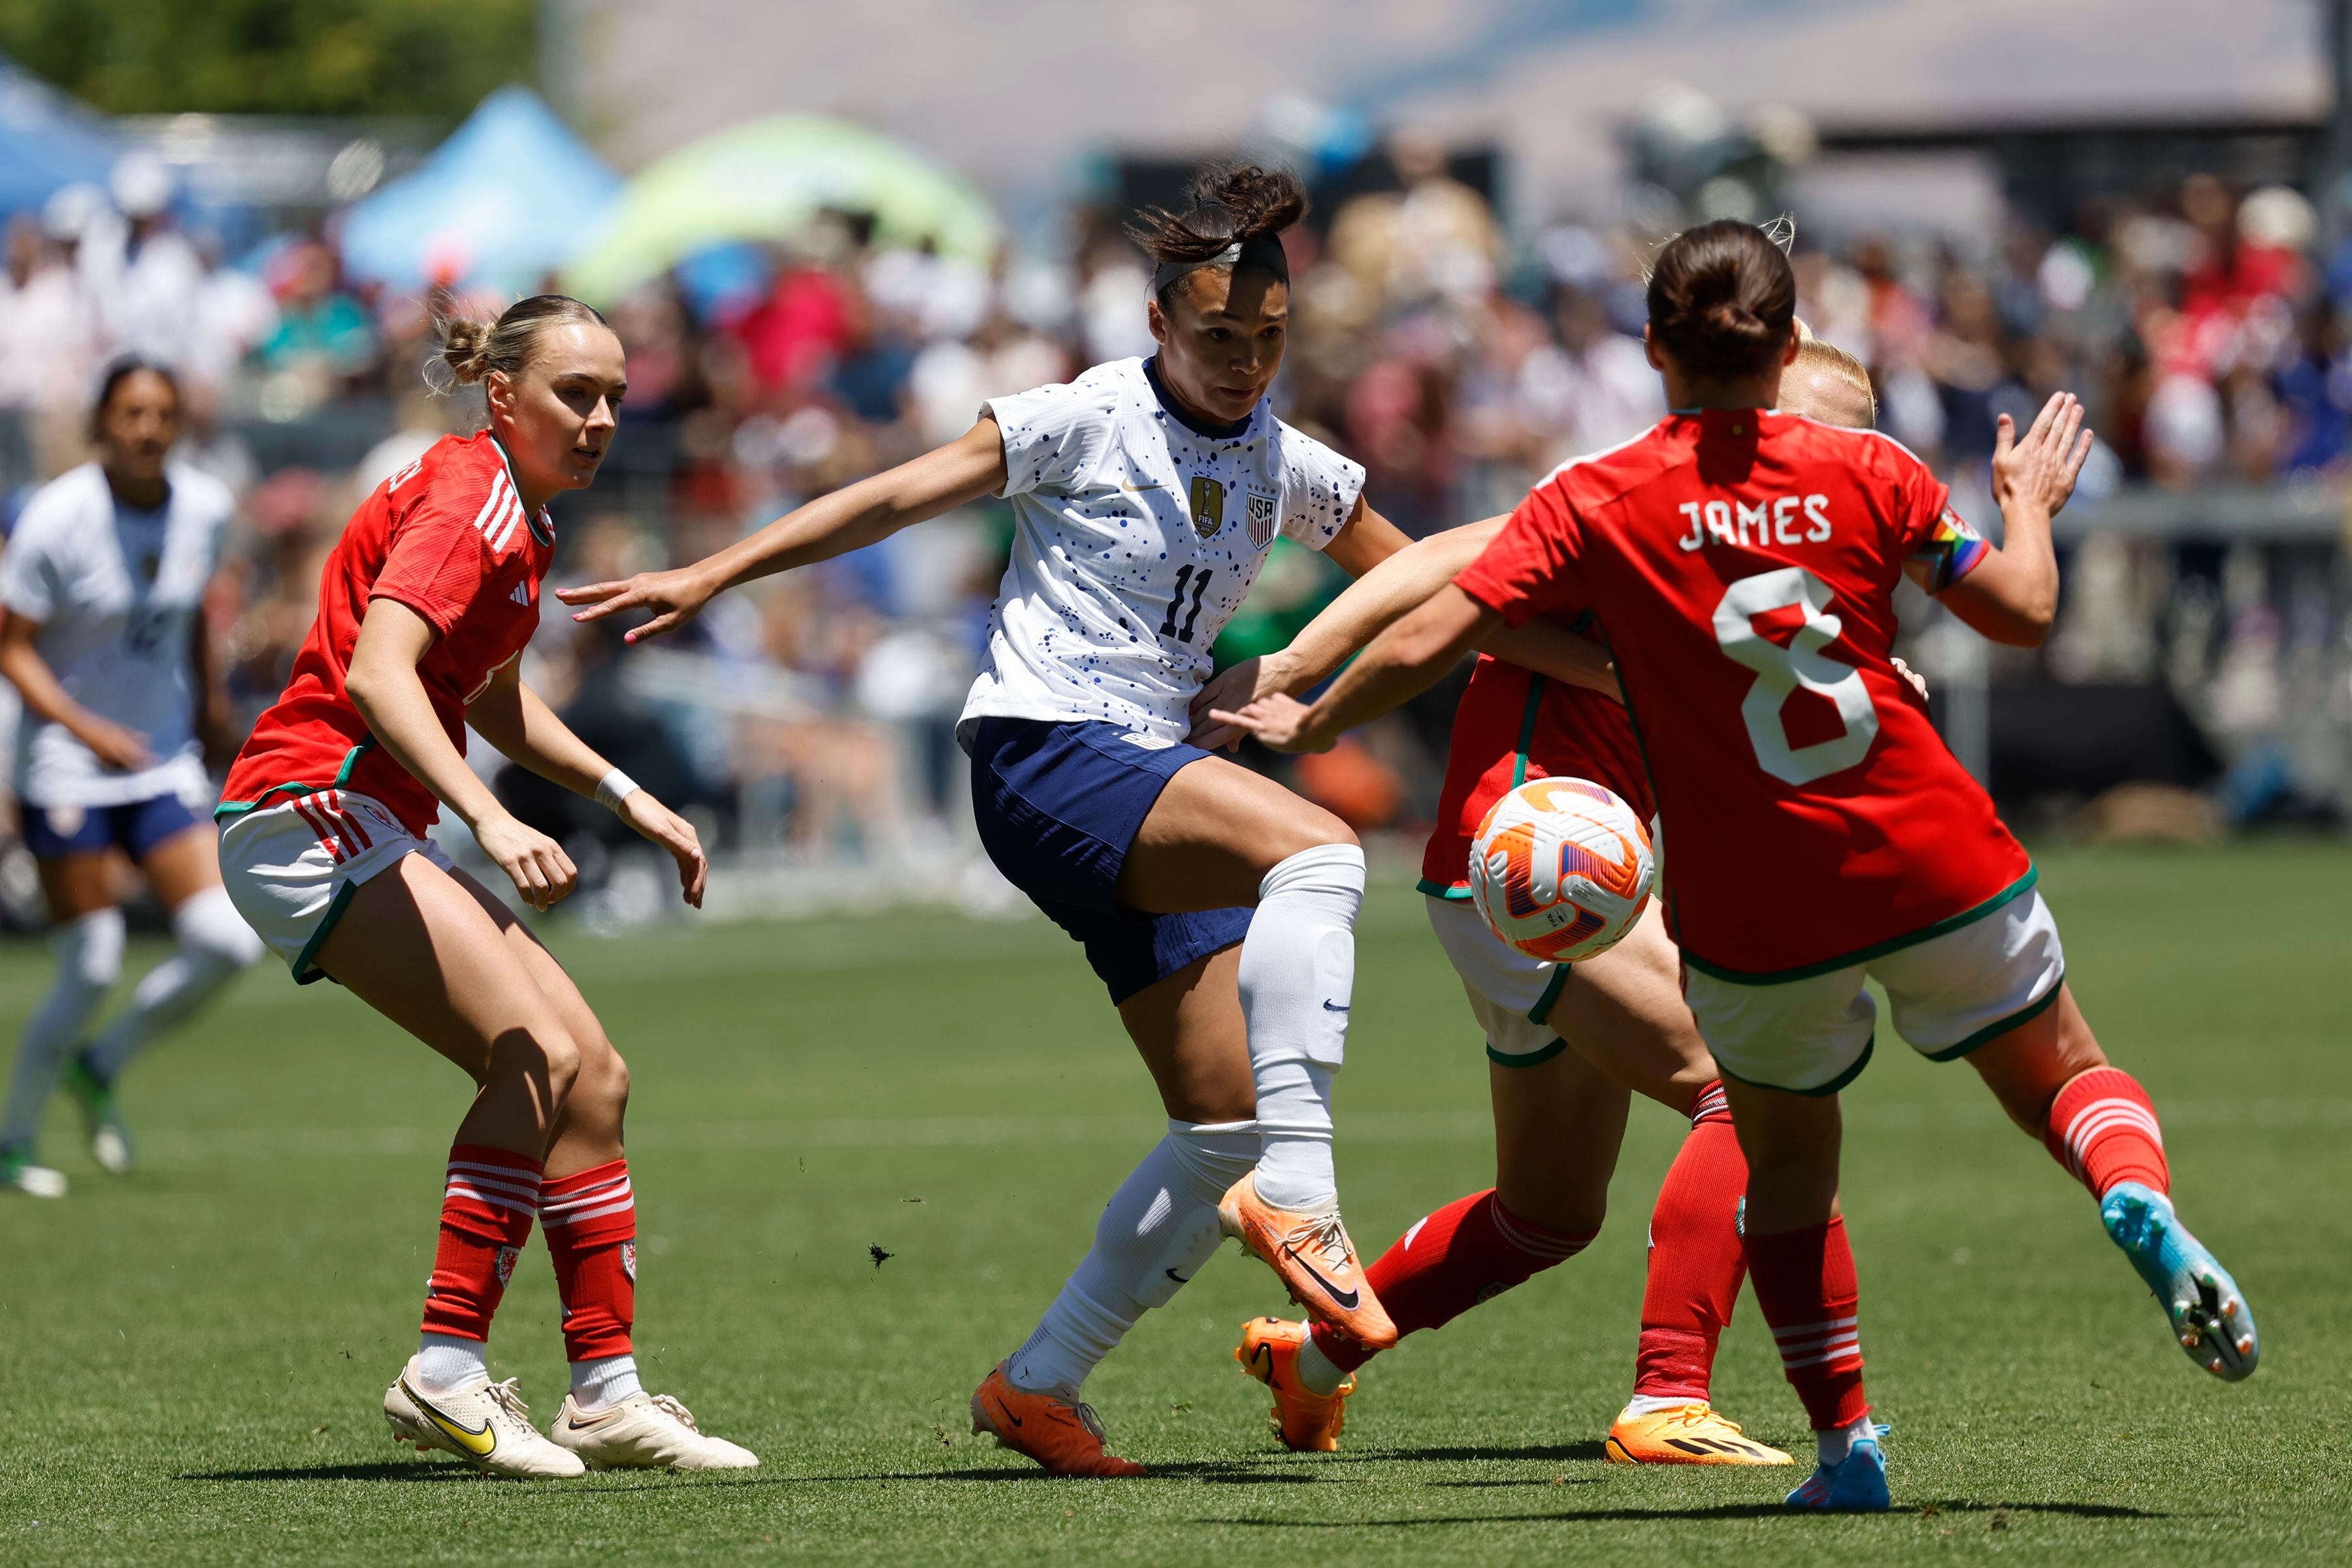 Trinity Rodman's goals lead USWNT to 2-0 win over Wales in World Cup  sendoff game